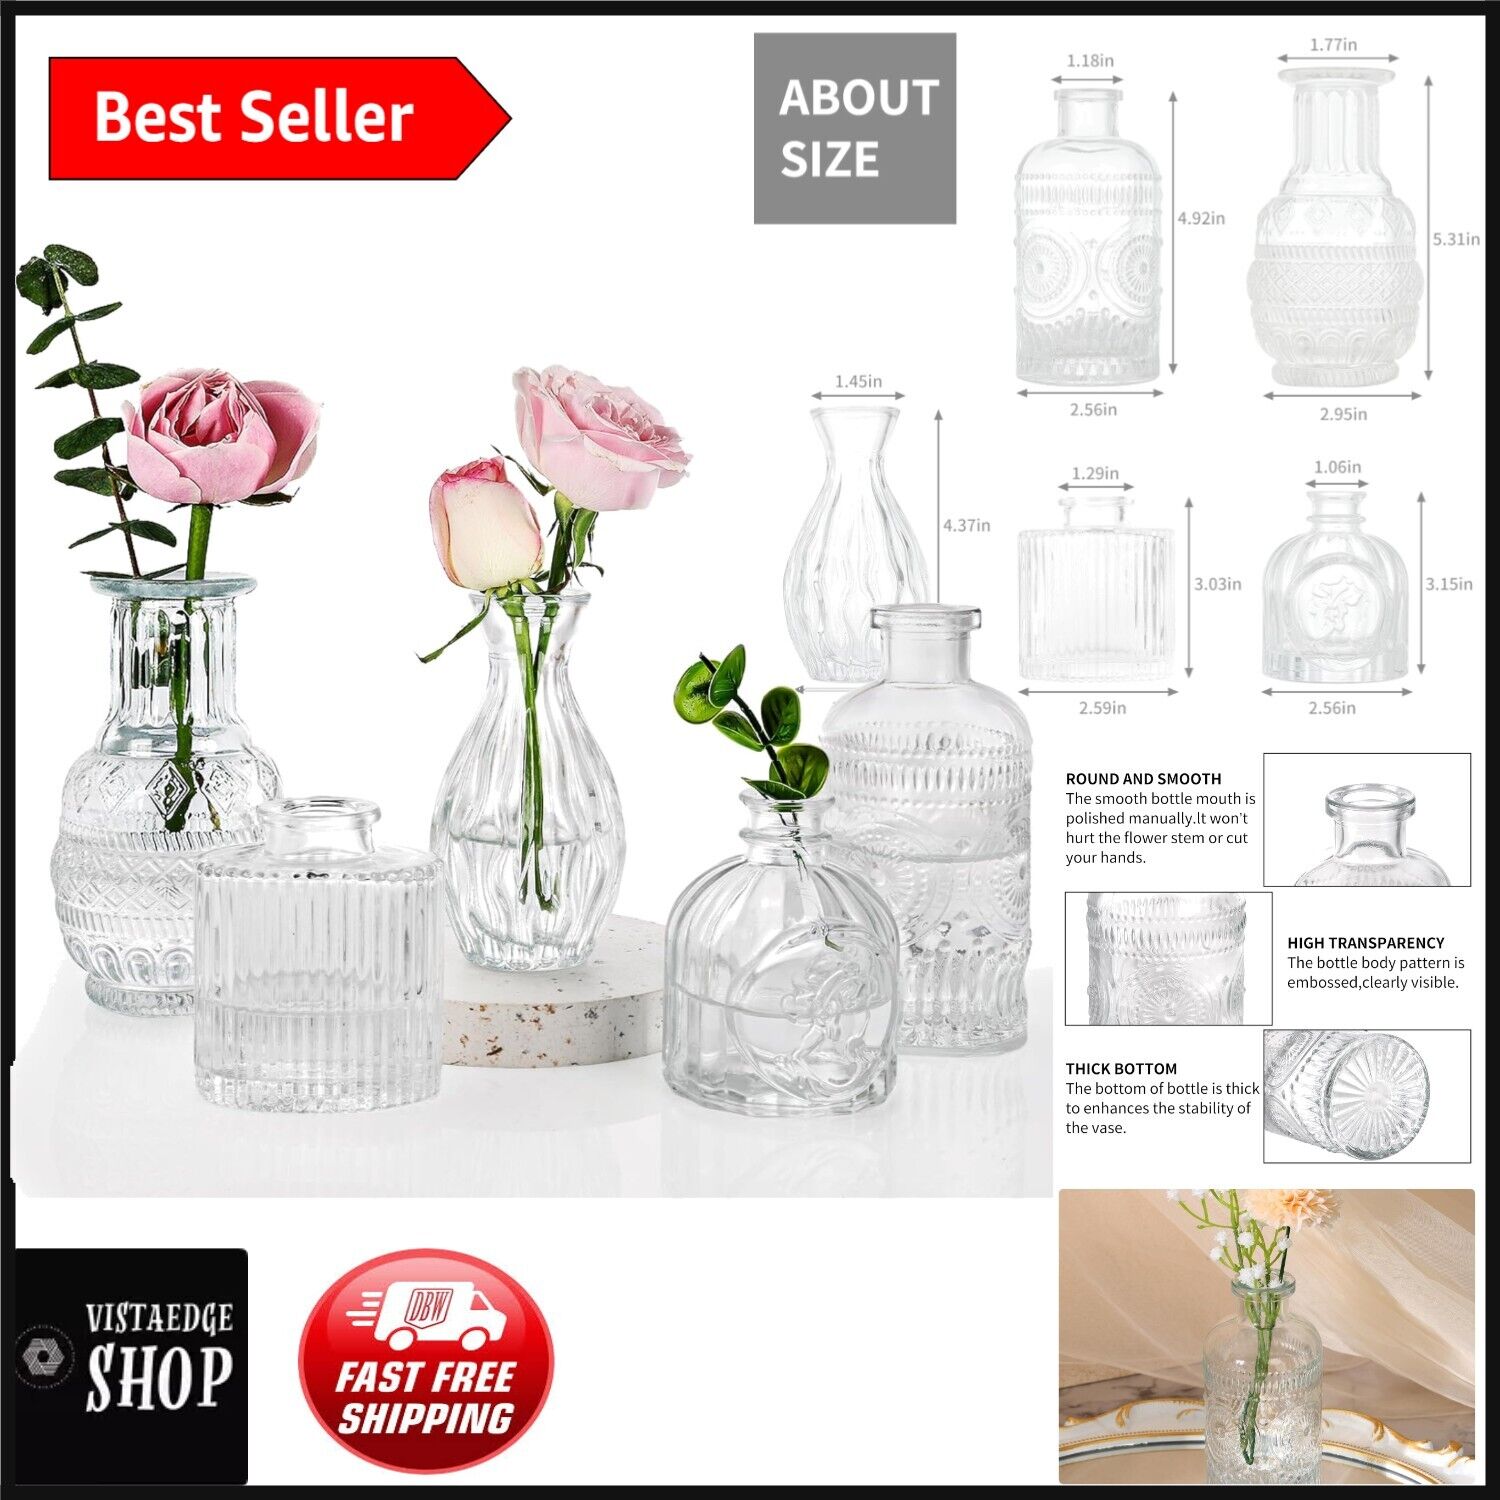 5-Piece Decorative Glass Bud Vases - Vintage Style for Centerpieces & Gifts